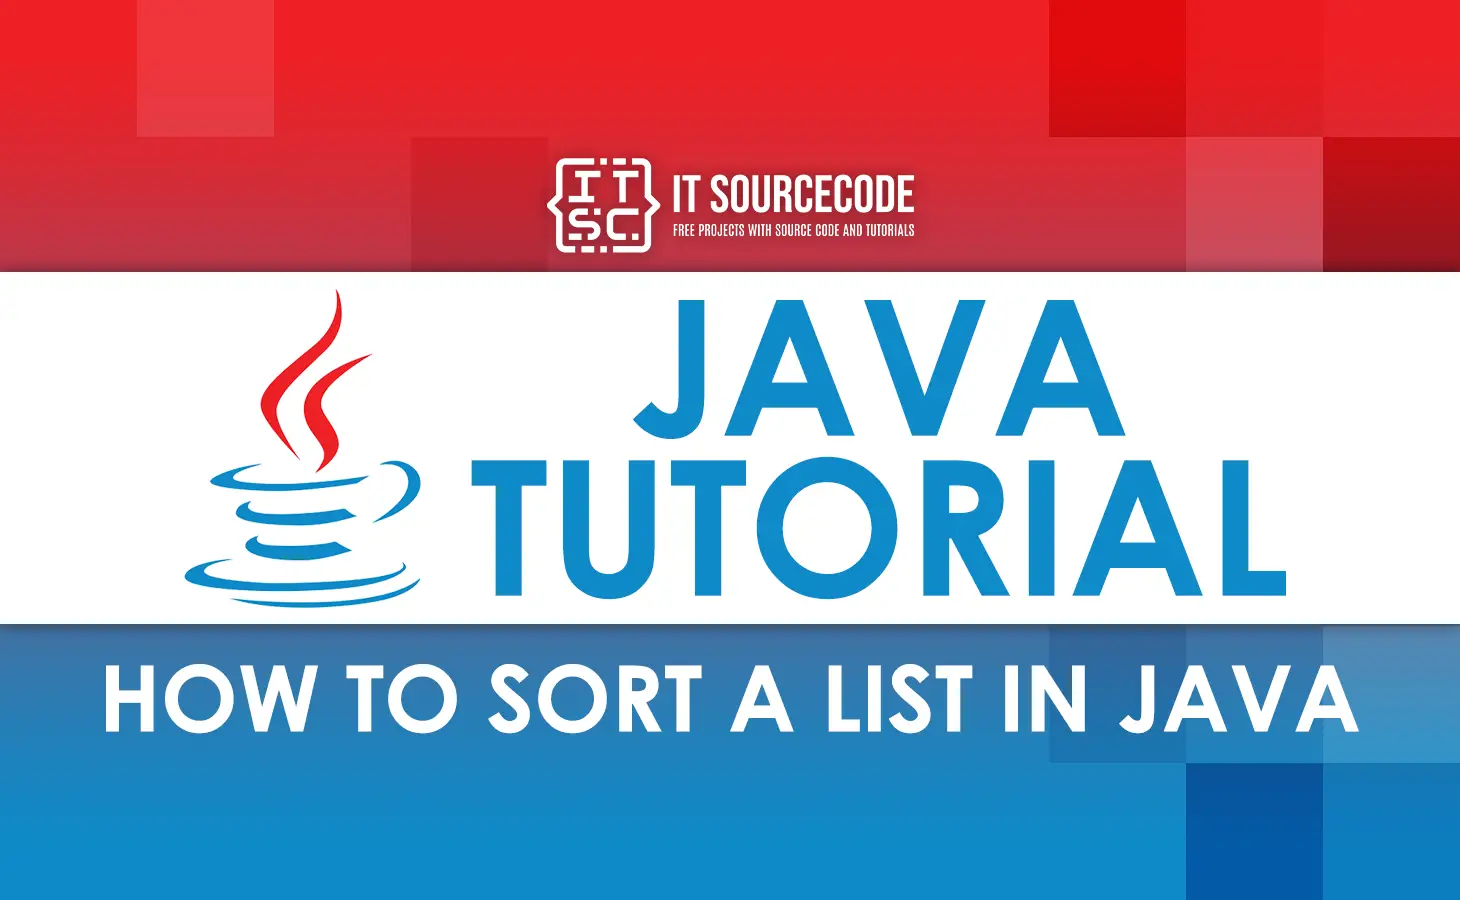 How To Sort a List in Java